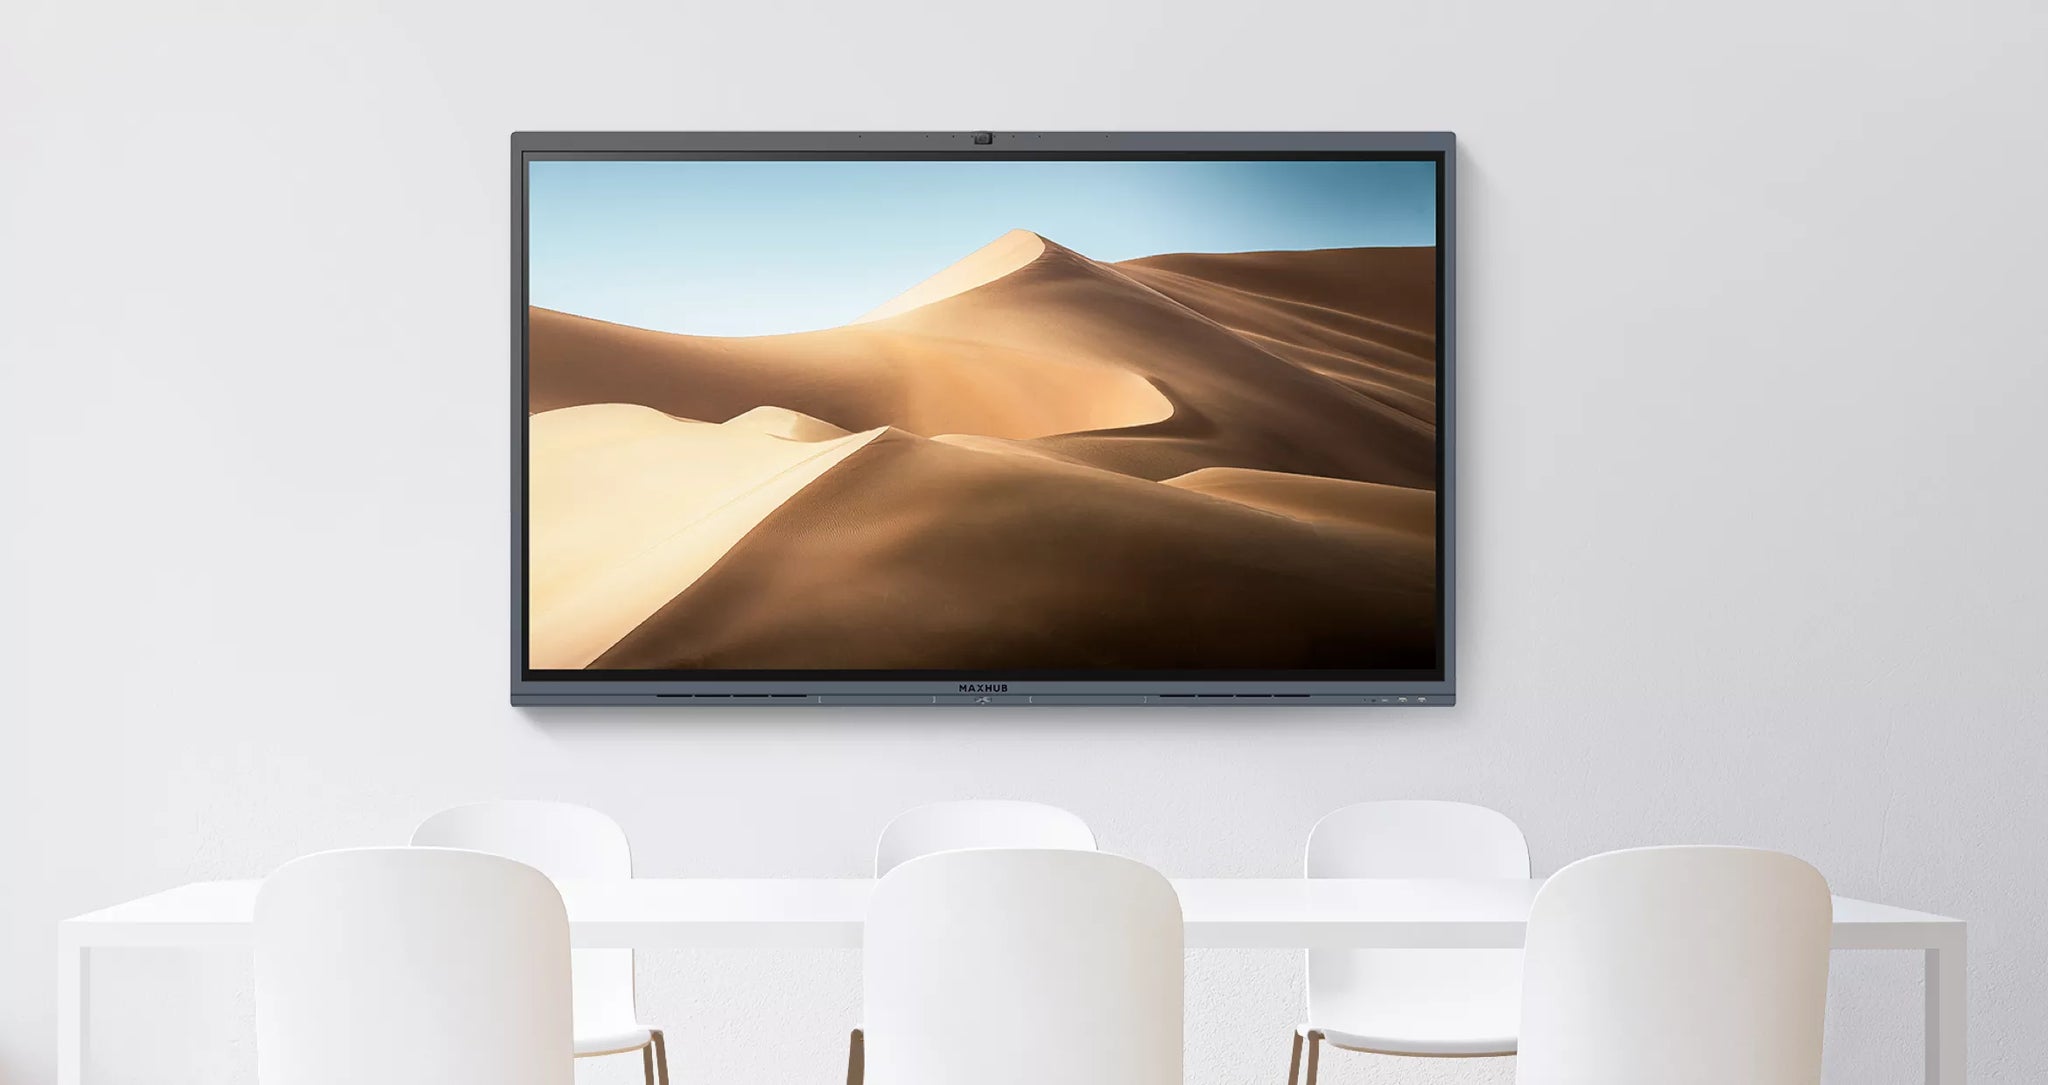 MAXHUB C5530 - Interactive Screen C5530, 55 Inches, Touch 4K Flat Panel, 48MP Camera, Auto Framing